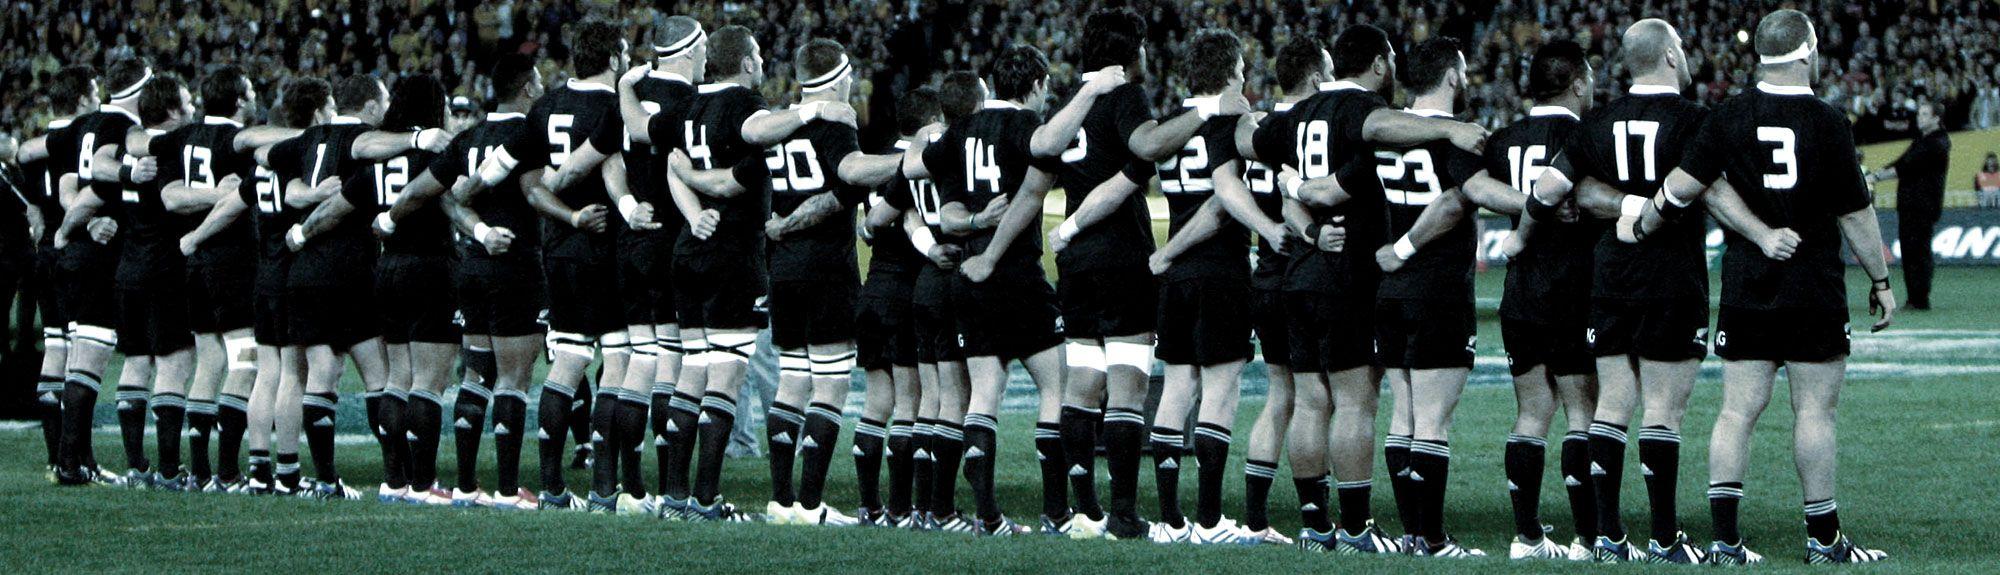 All Blacks: how New Zealand sustains its rugby dynasty. By Andy Bull